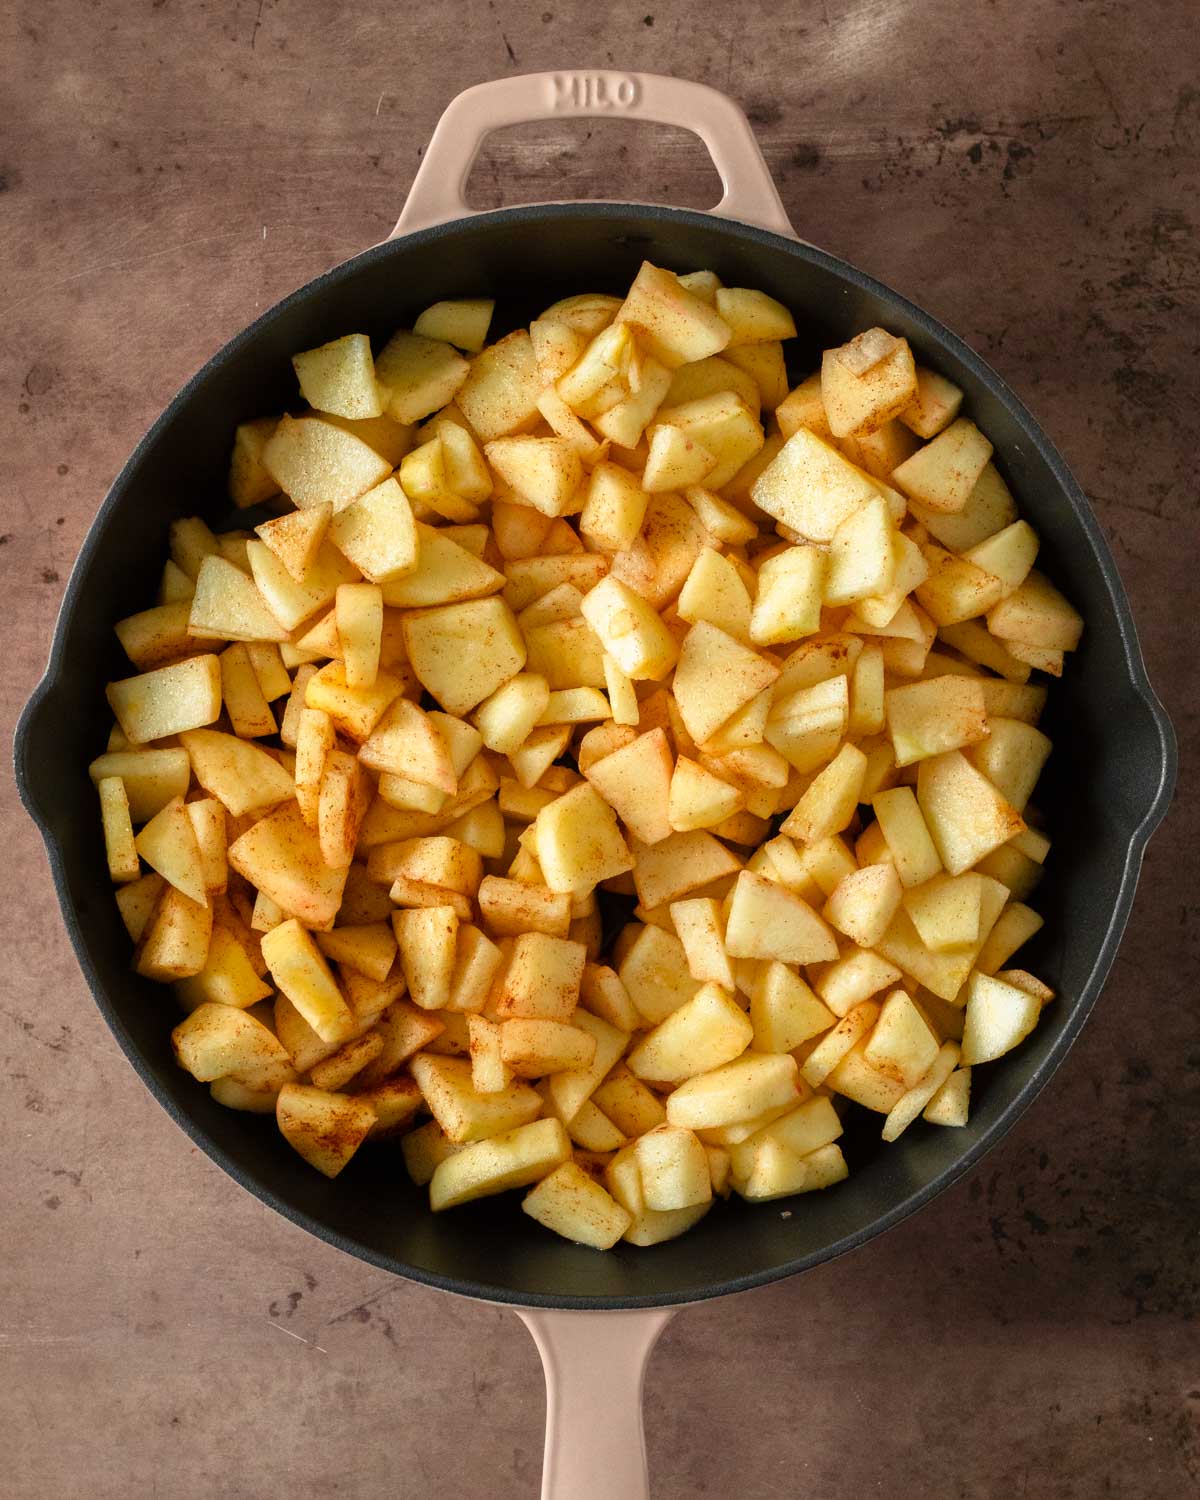 Step 3. Transfer the apples to a skillet or baking dish